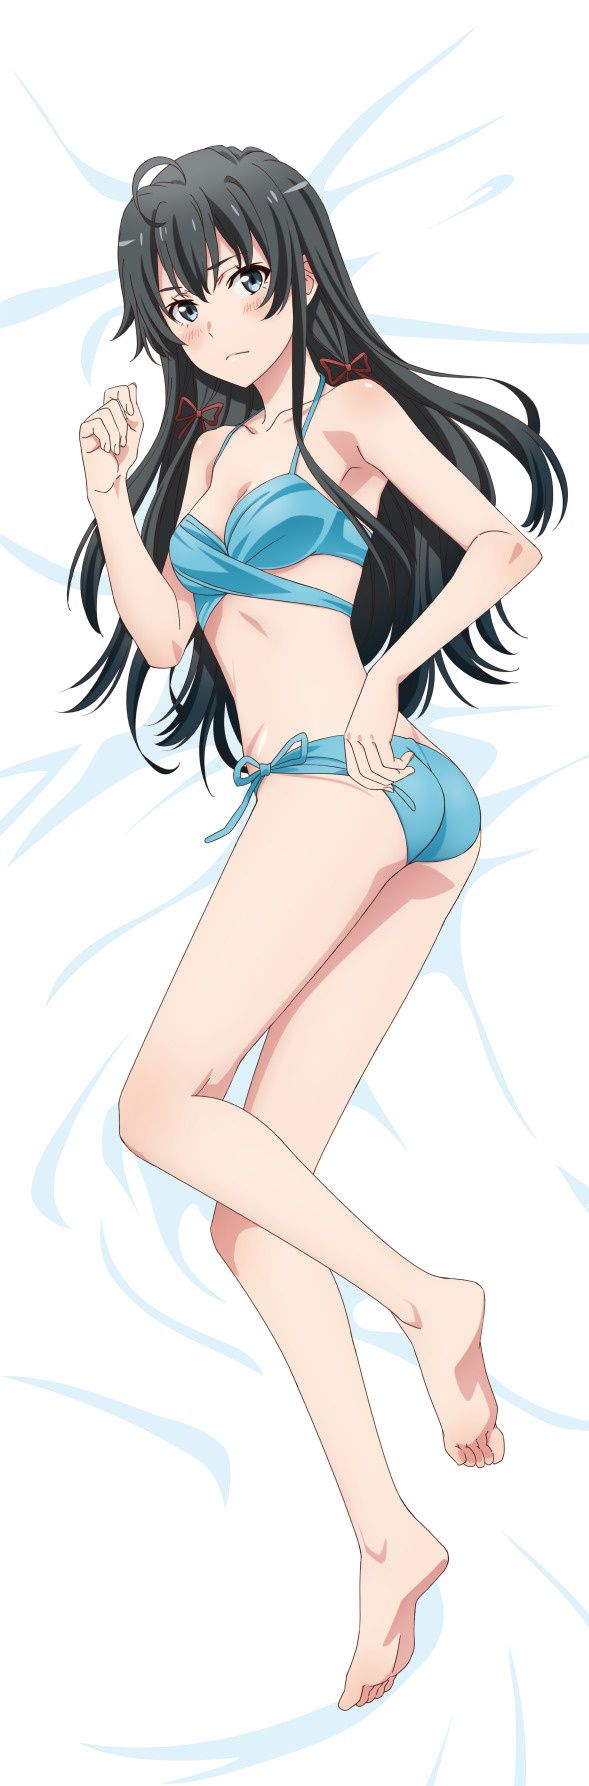 【Hugging Pillow】Images of erotic hugging pillowcases from anime and video games Part 144 27